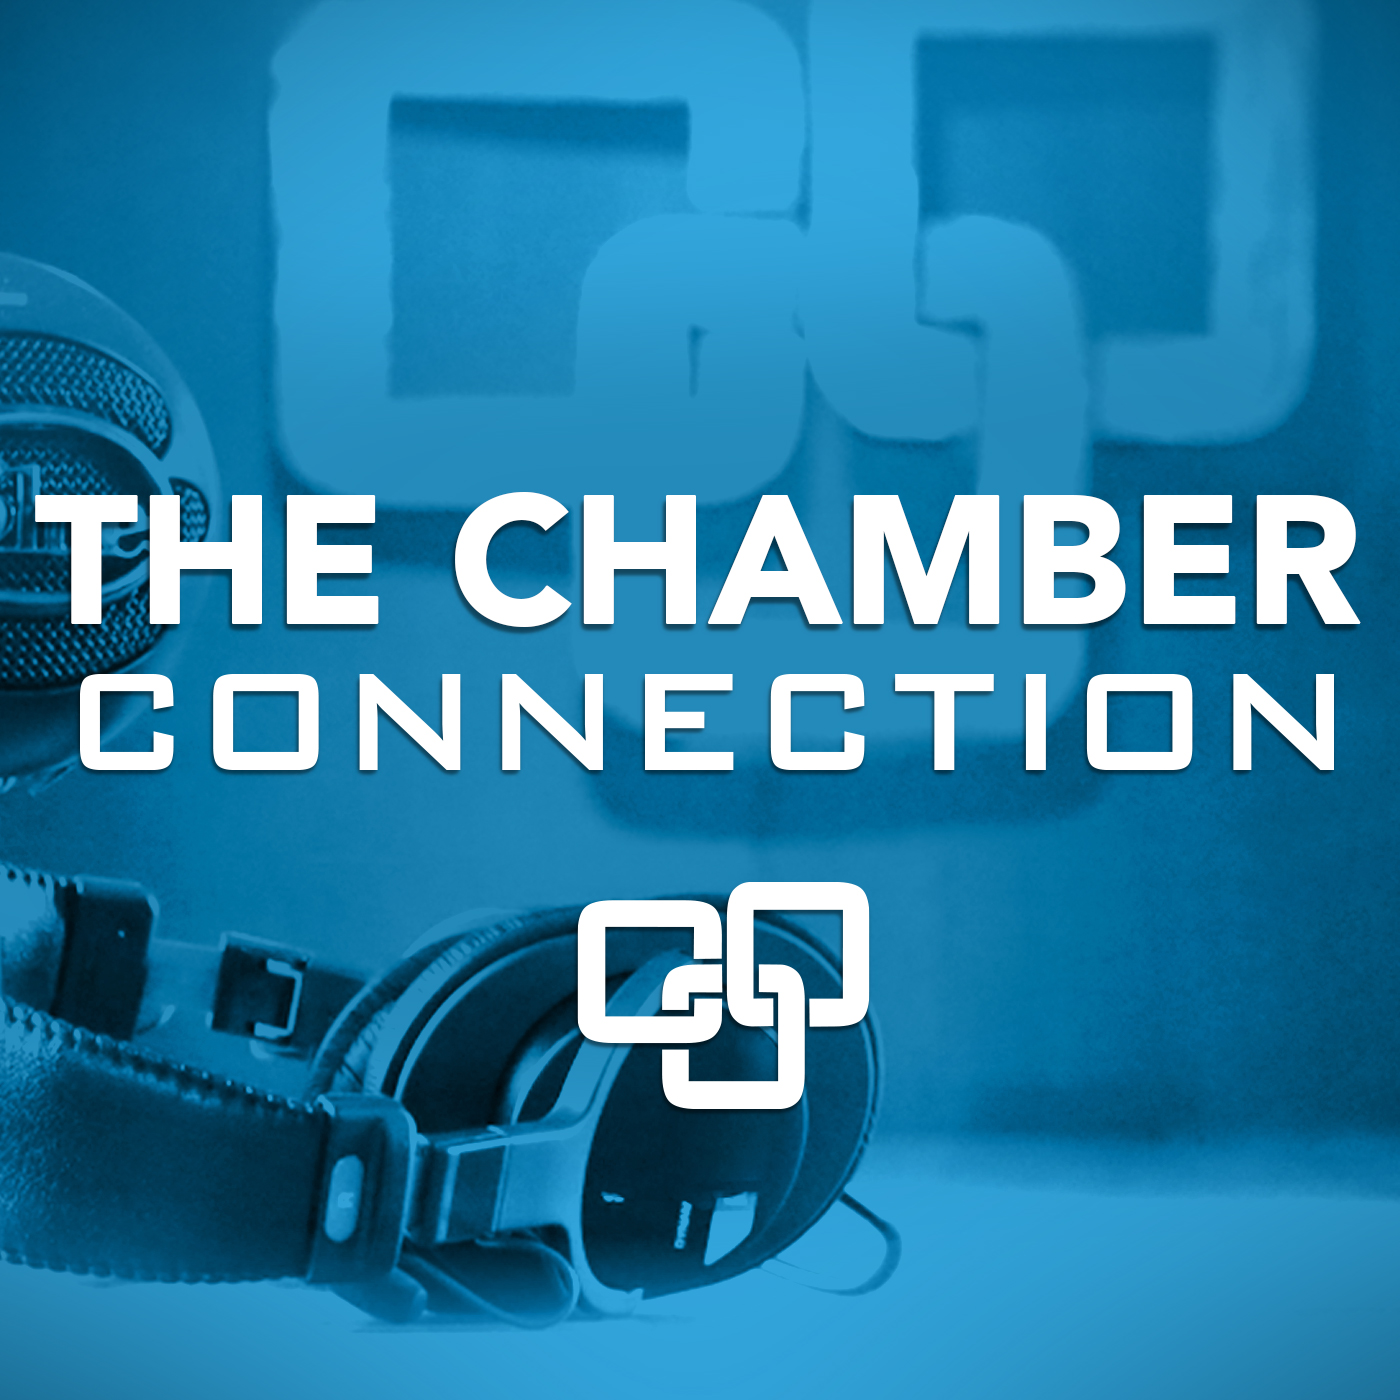 The Chamber Connection featuring Louise Dardis from the U.S. Census